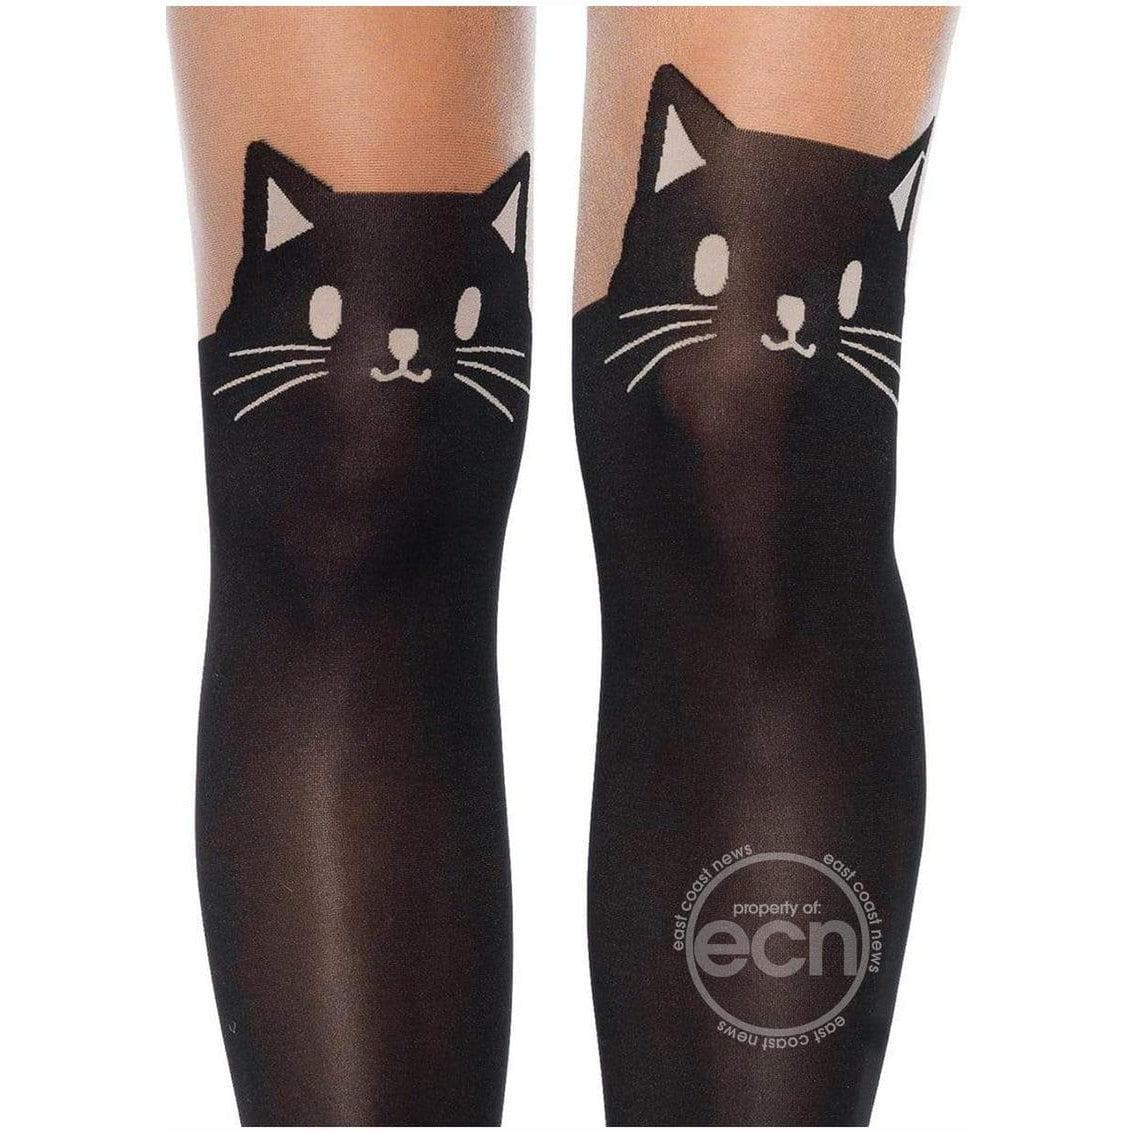 Leg Avenue Black Cat Spandex Opaque Pantyhose with Sheer Thigh Accent OS Black/Nude - Romantic Blessings